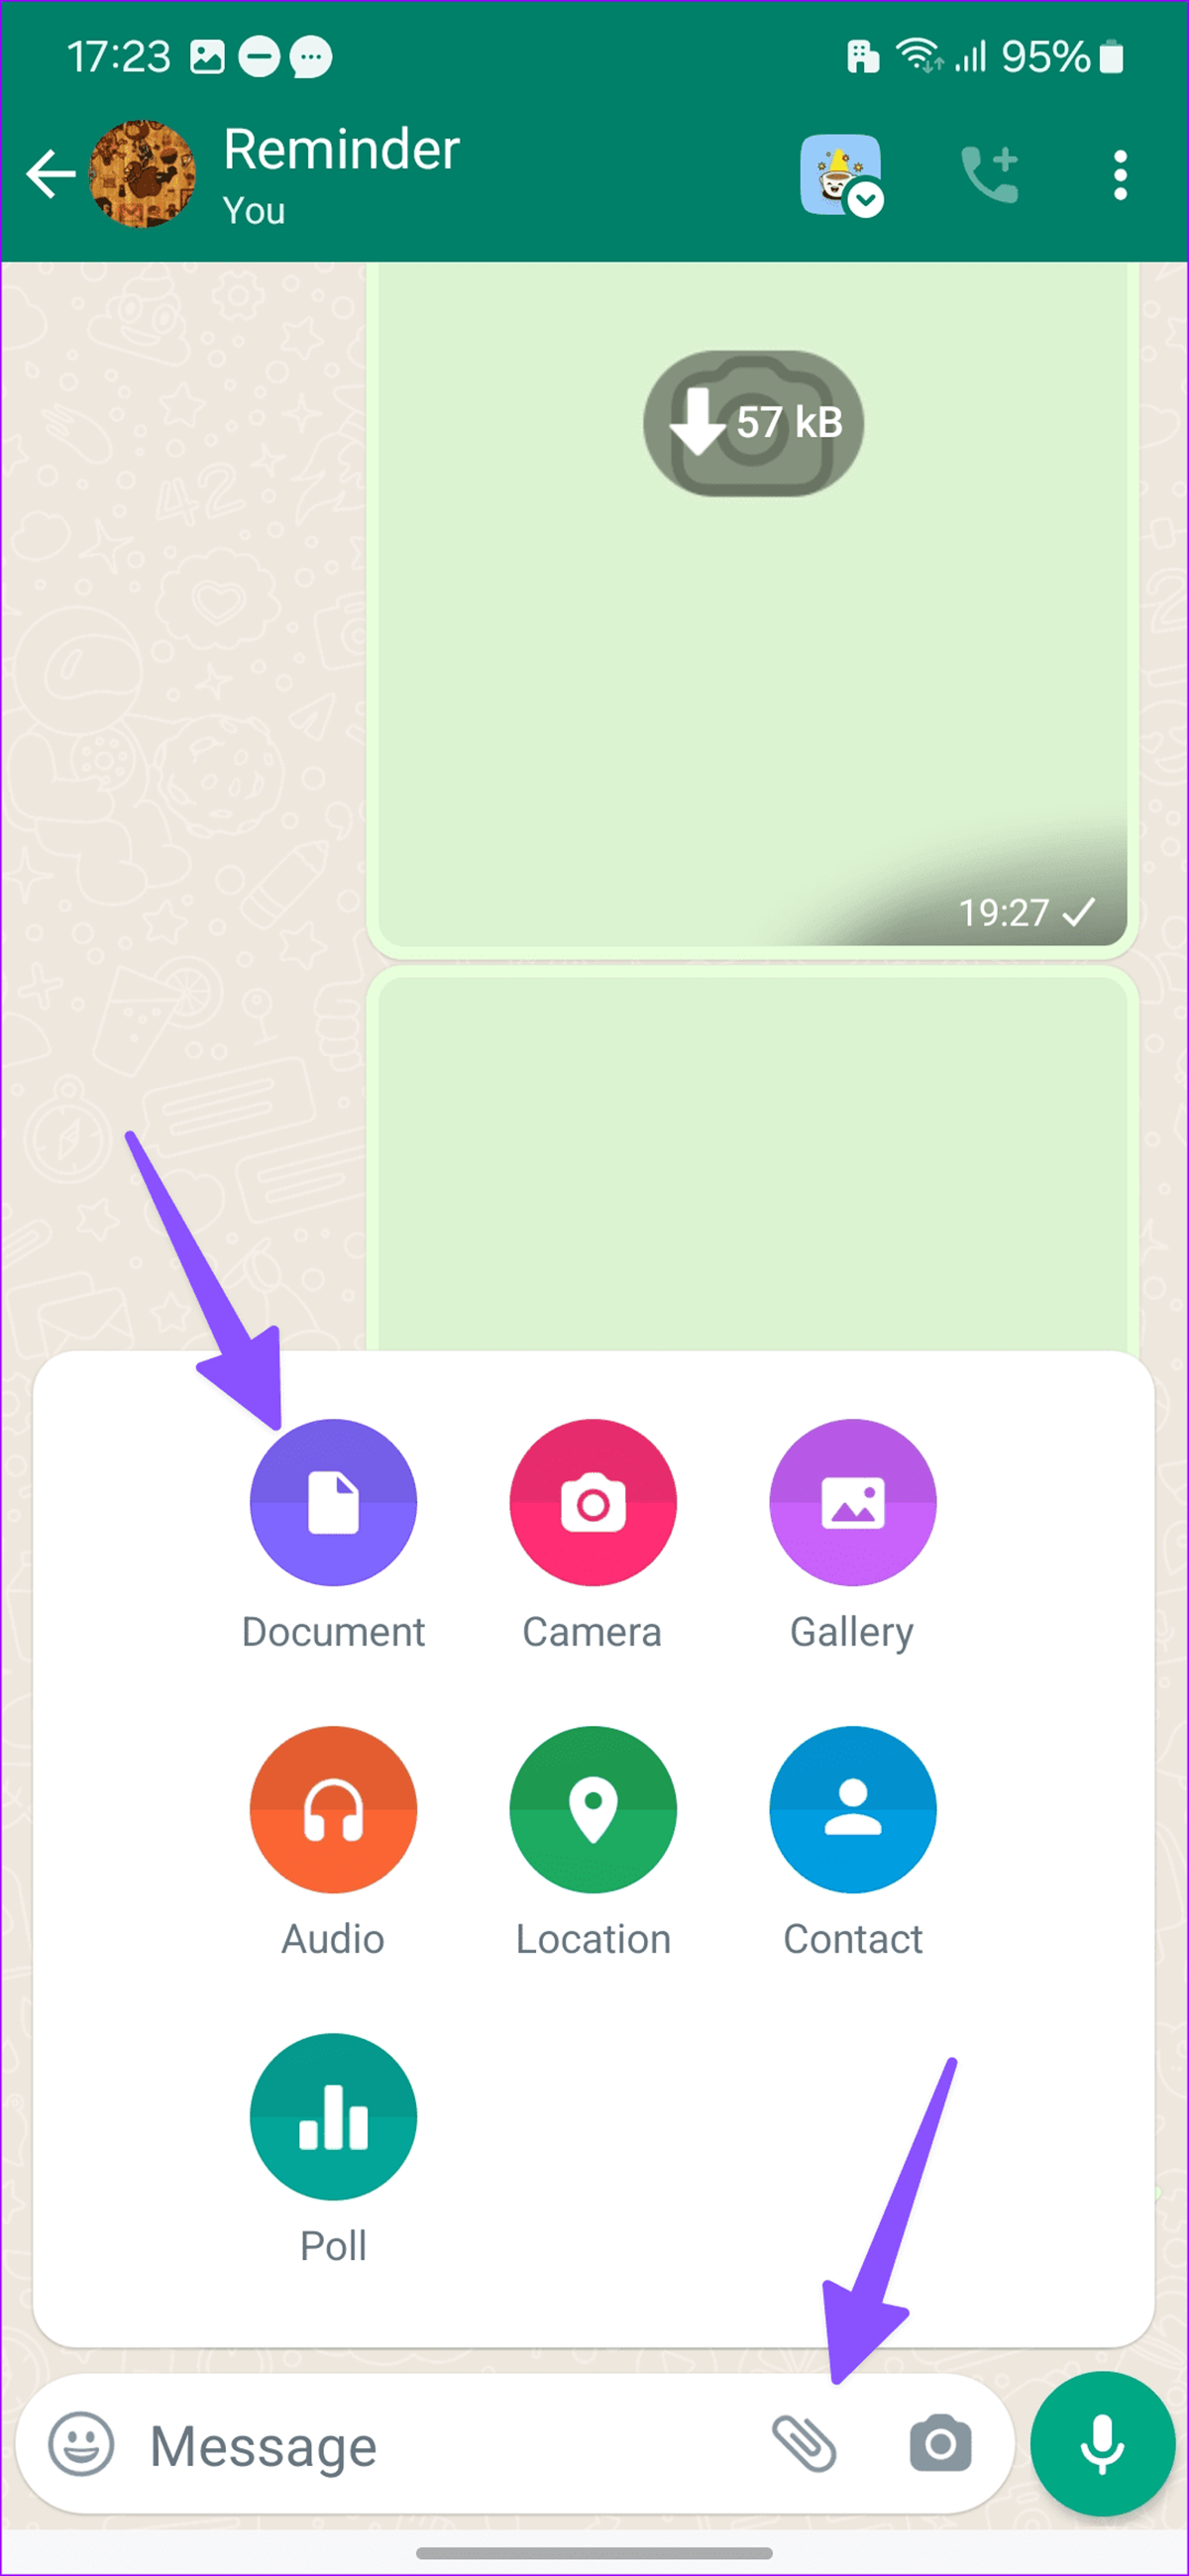 apping the camera icon and sending photos one by one works